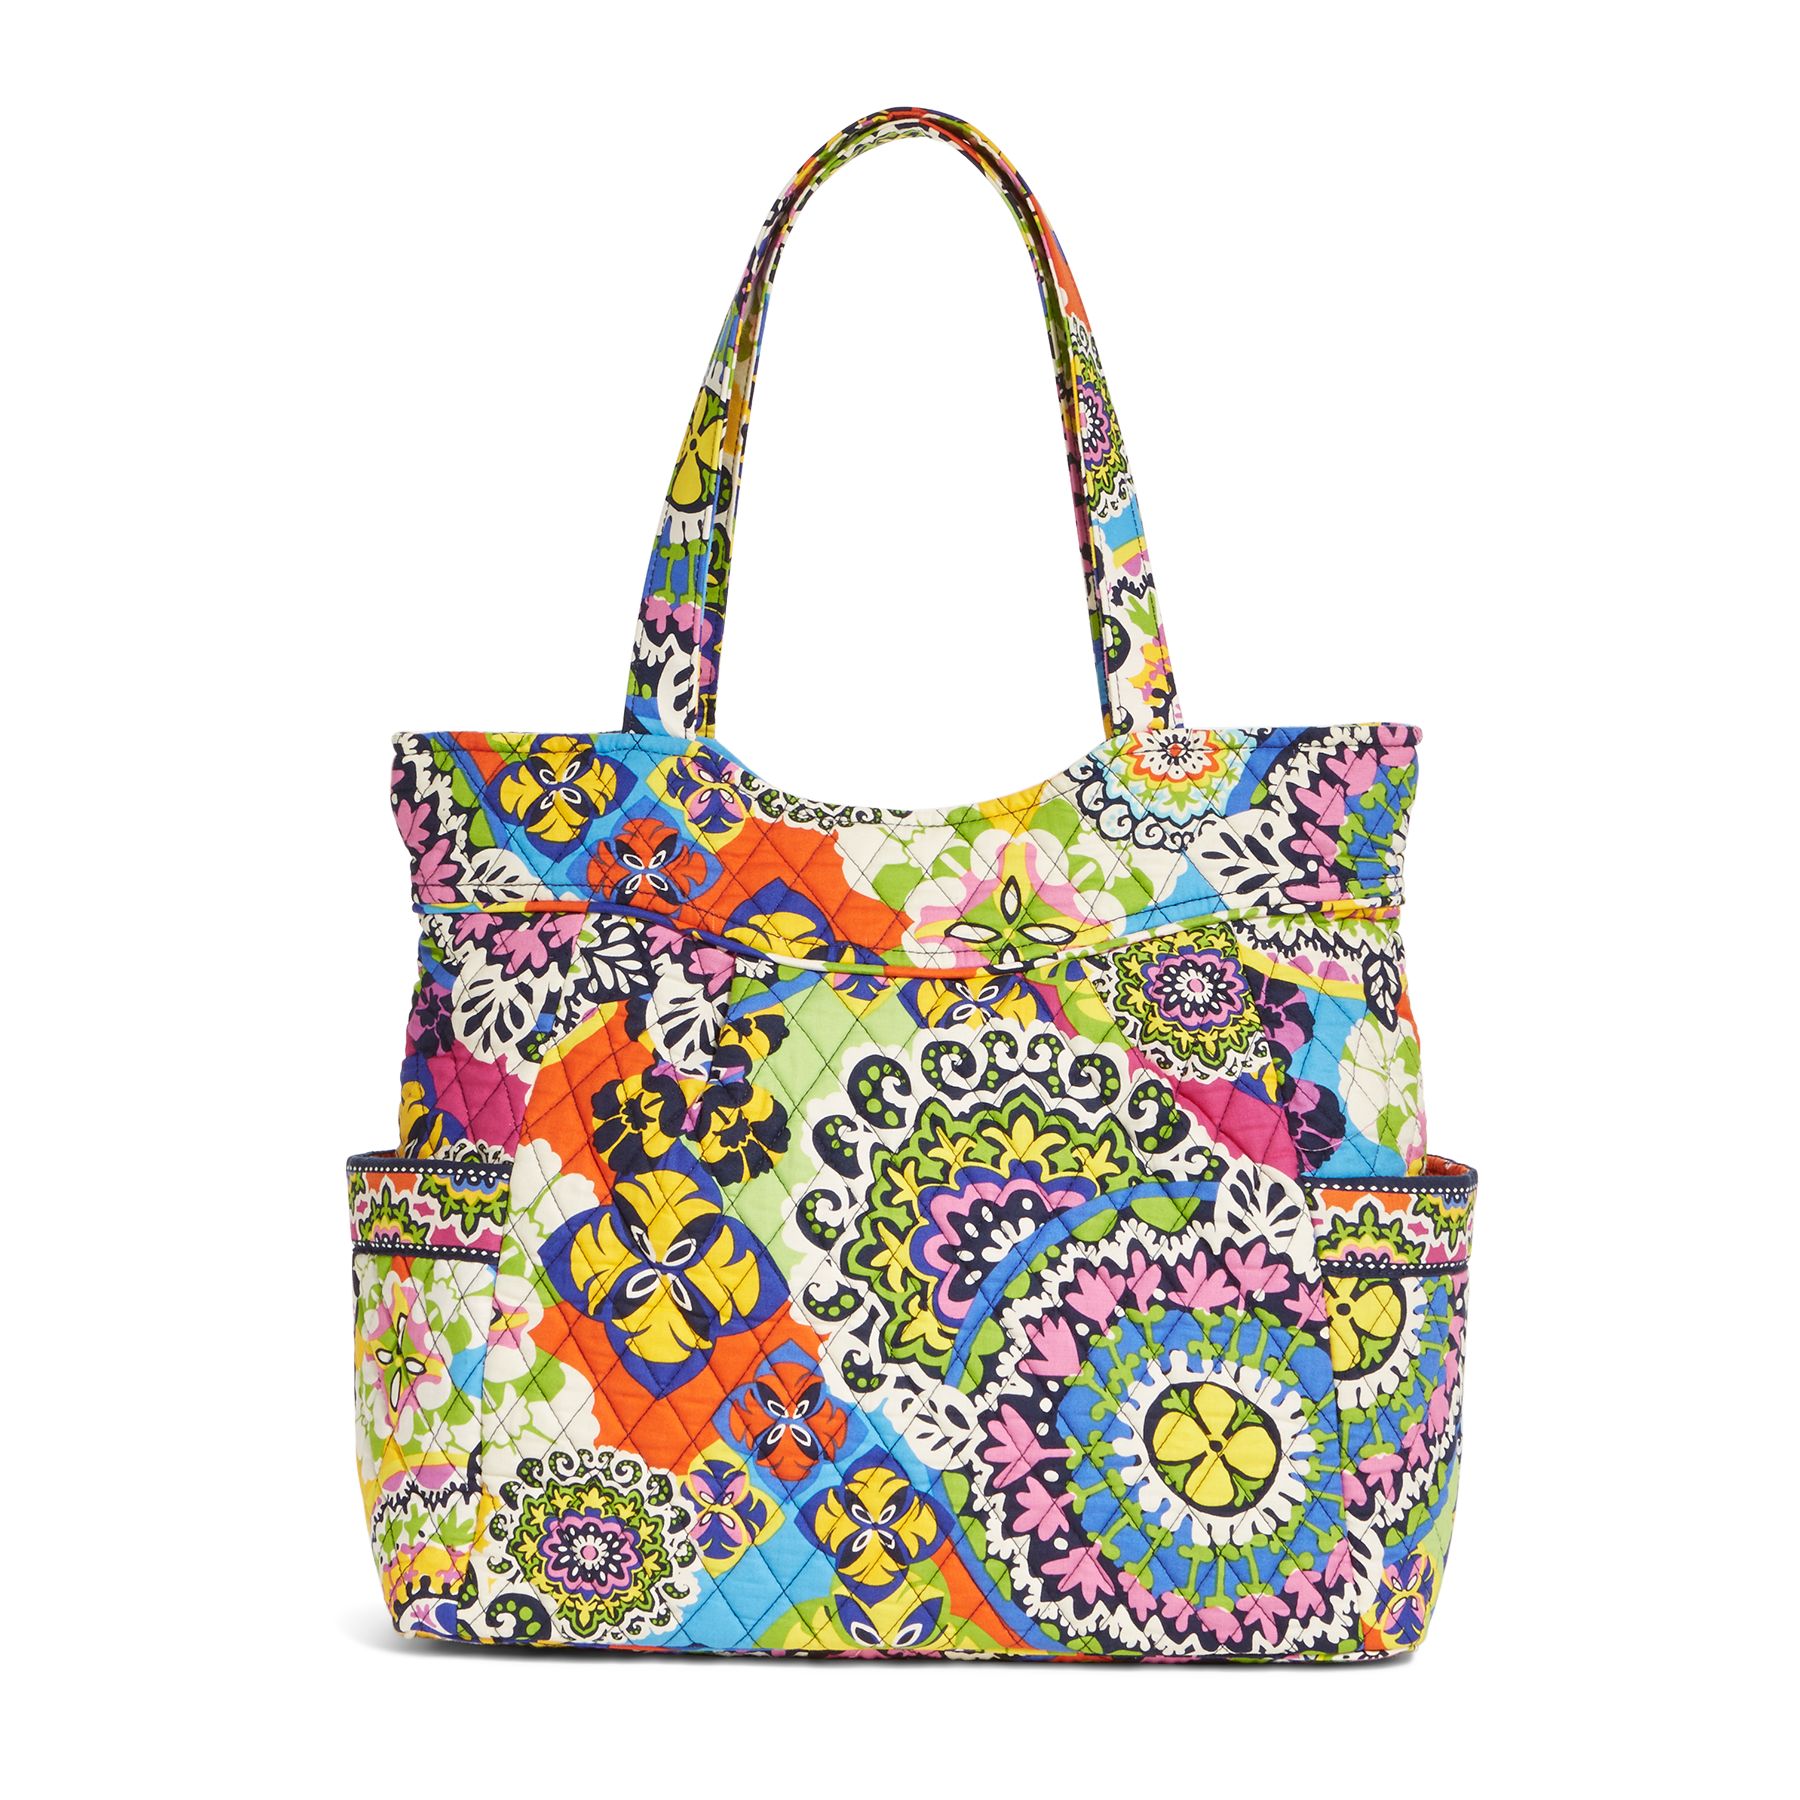 What is Hot at Vera Bradley This Weekend?